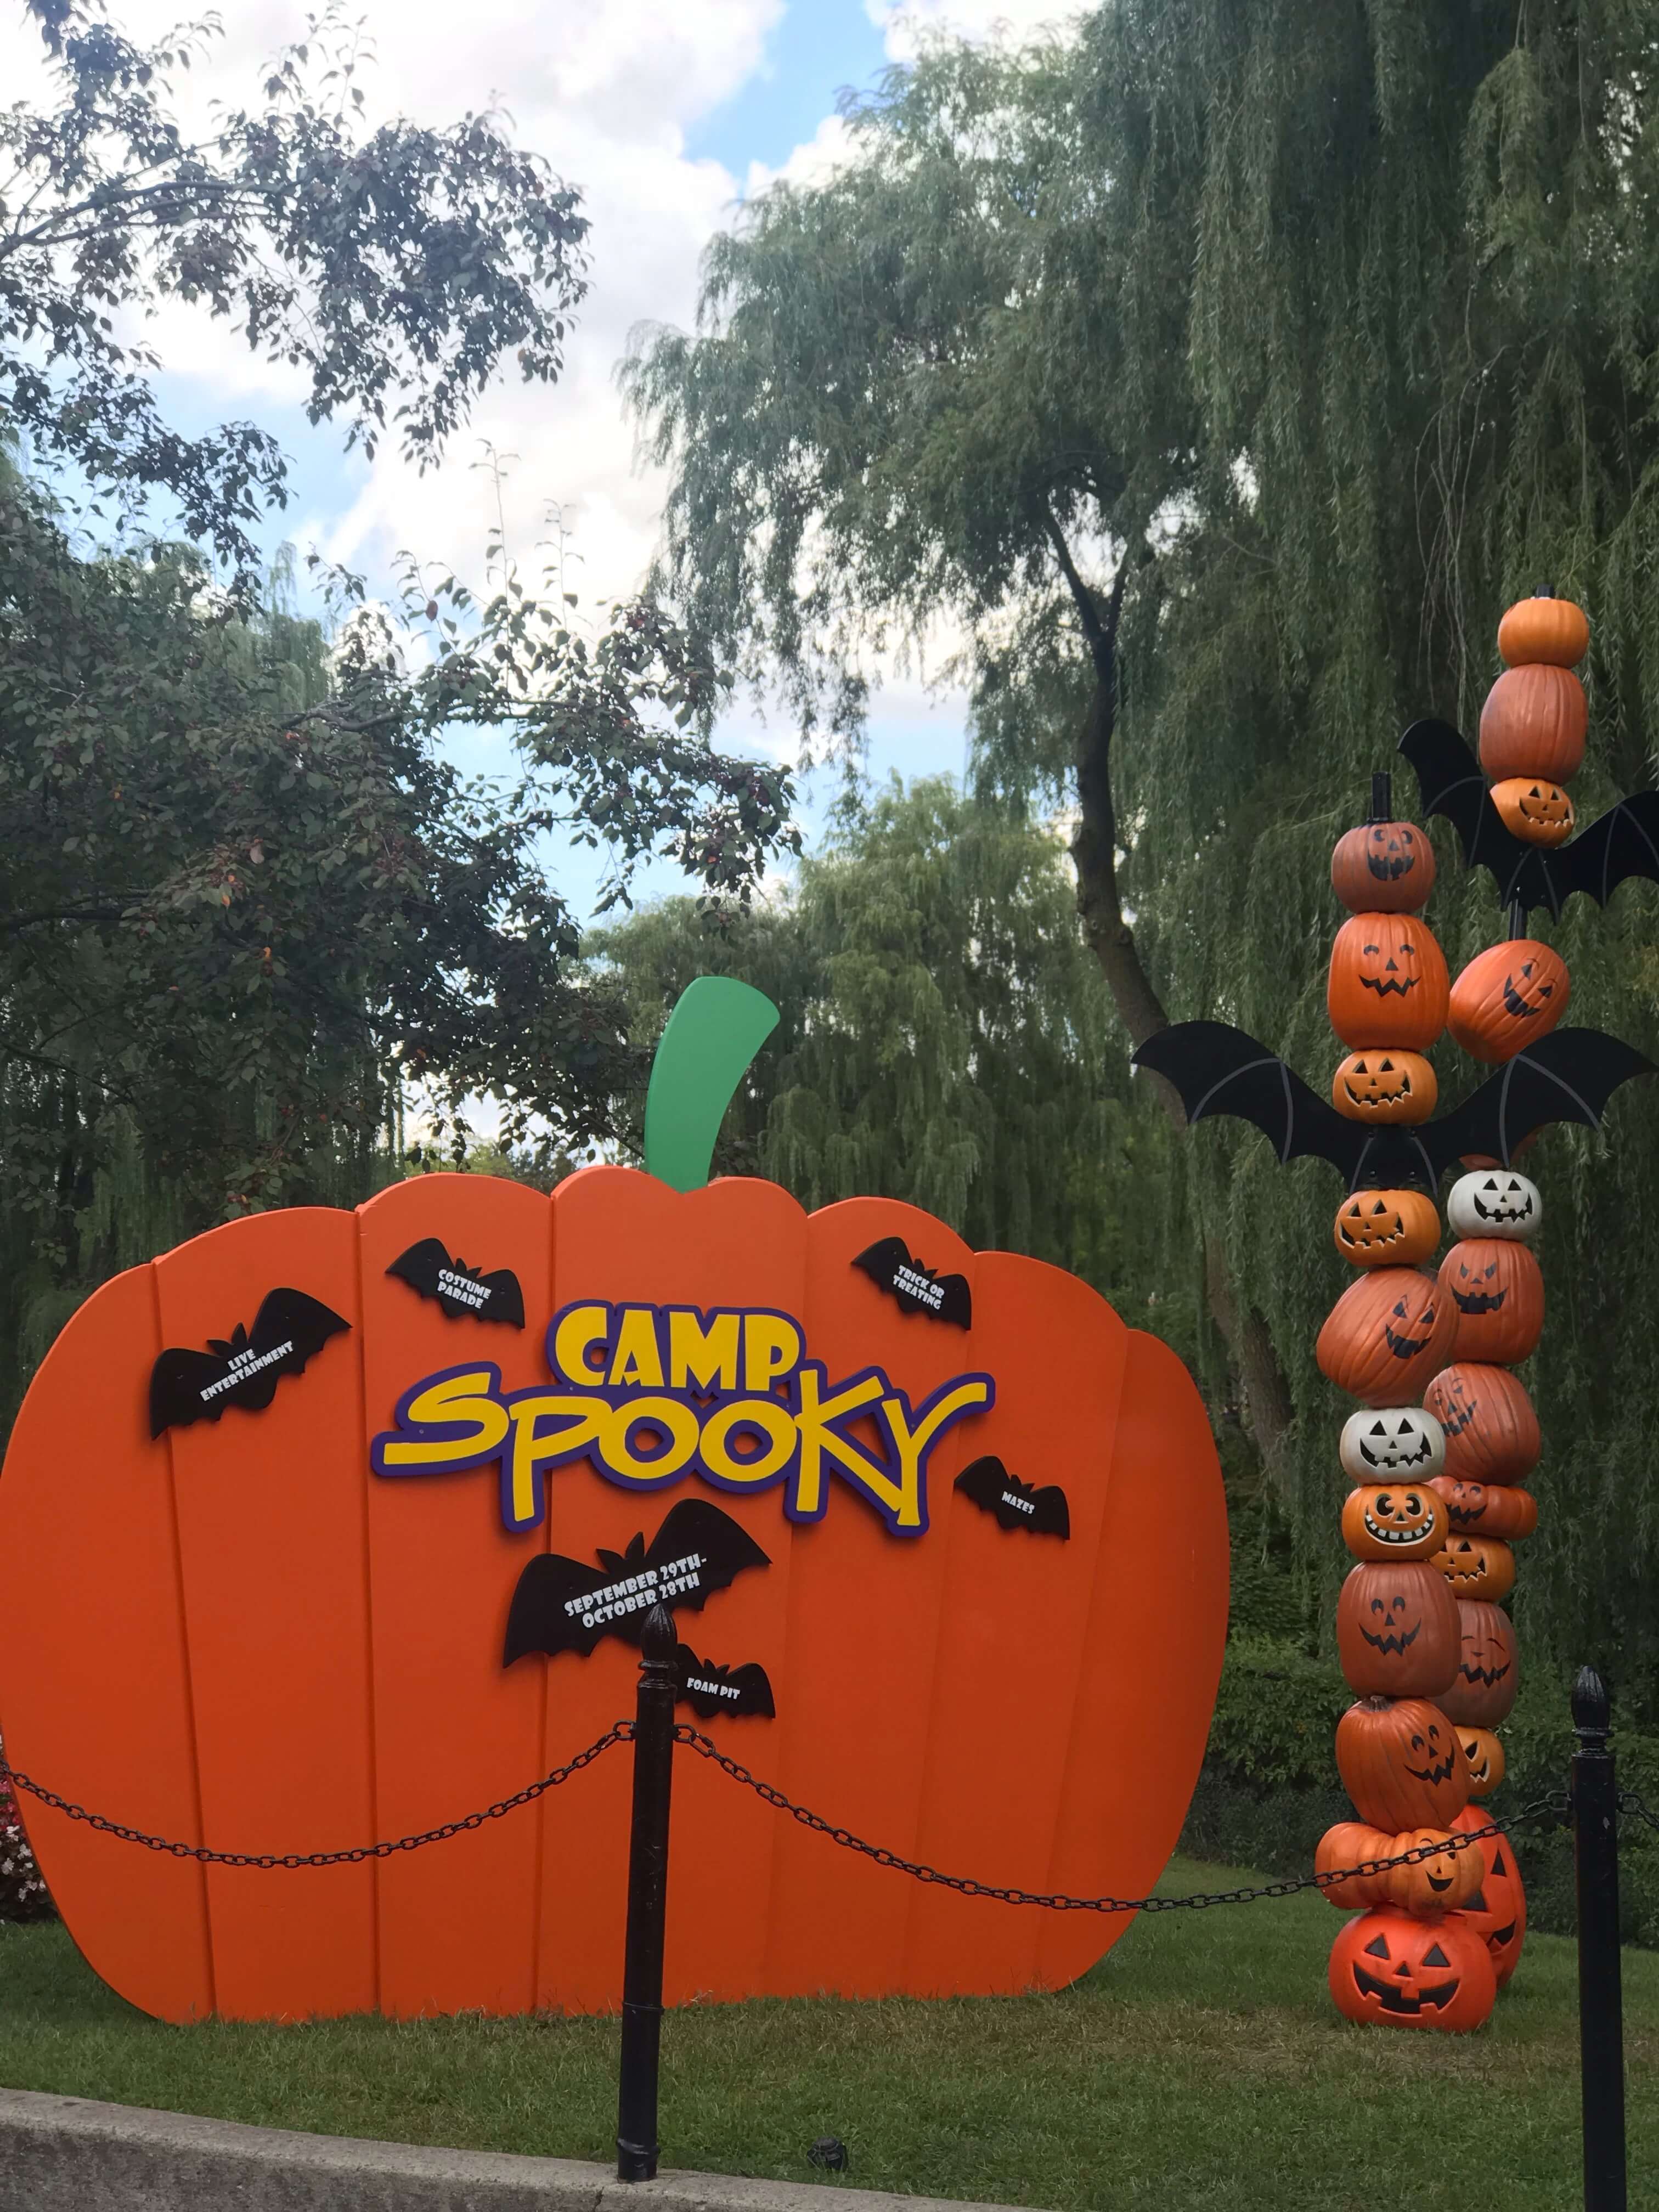 What to do at Canada's Wonderland's Camp Spooky sparkleshinylove